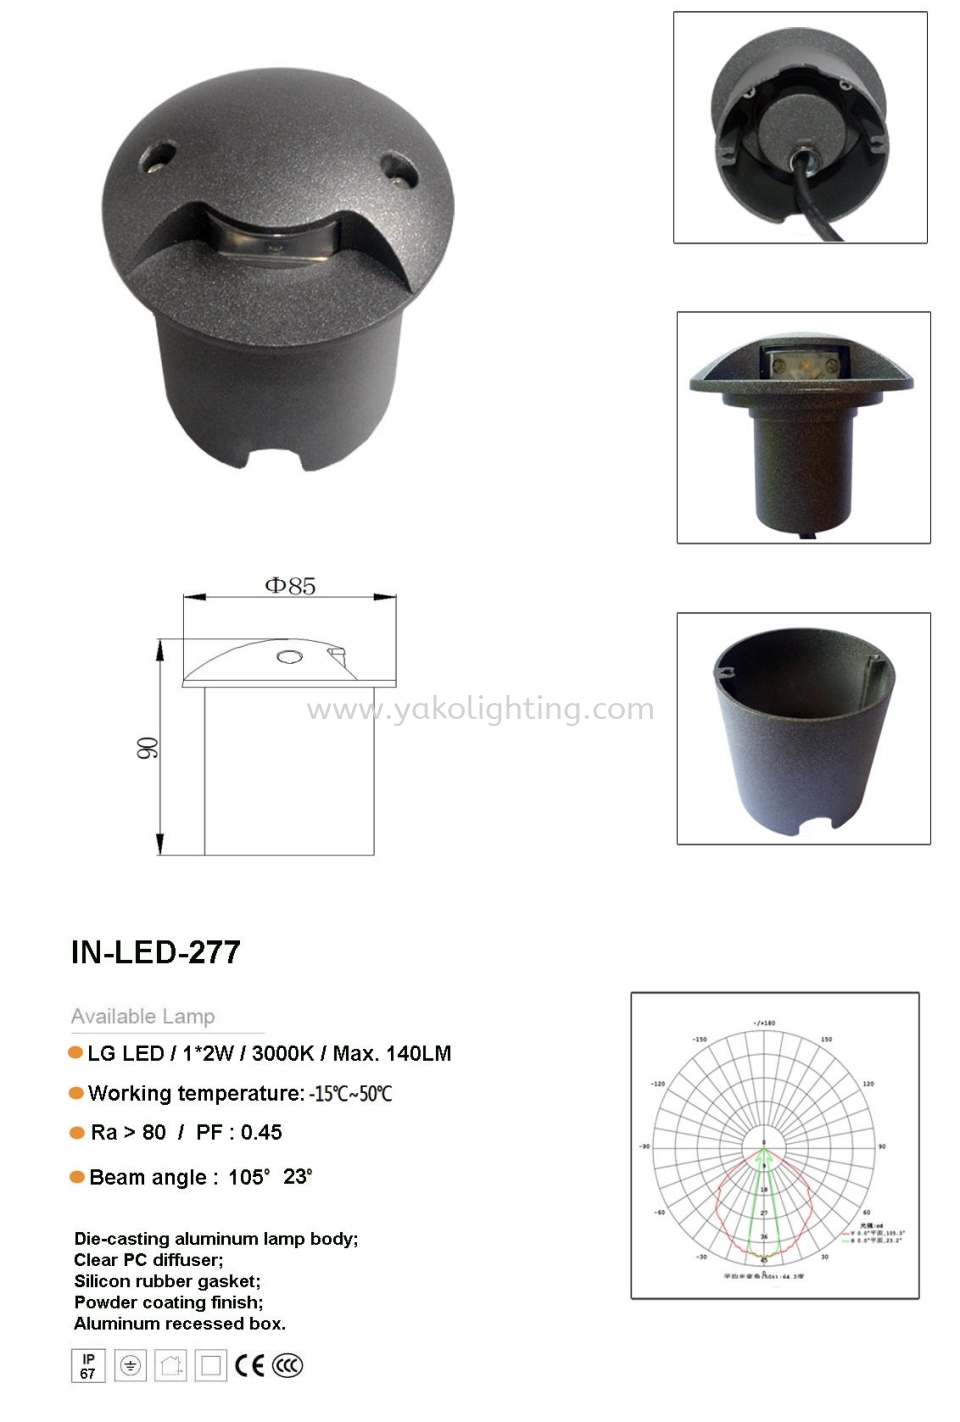 IN-LED-277 UNDERGROUND OD OUTDOOR 